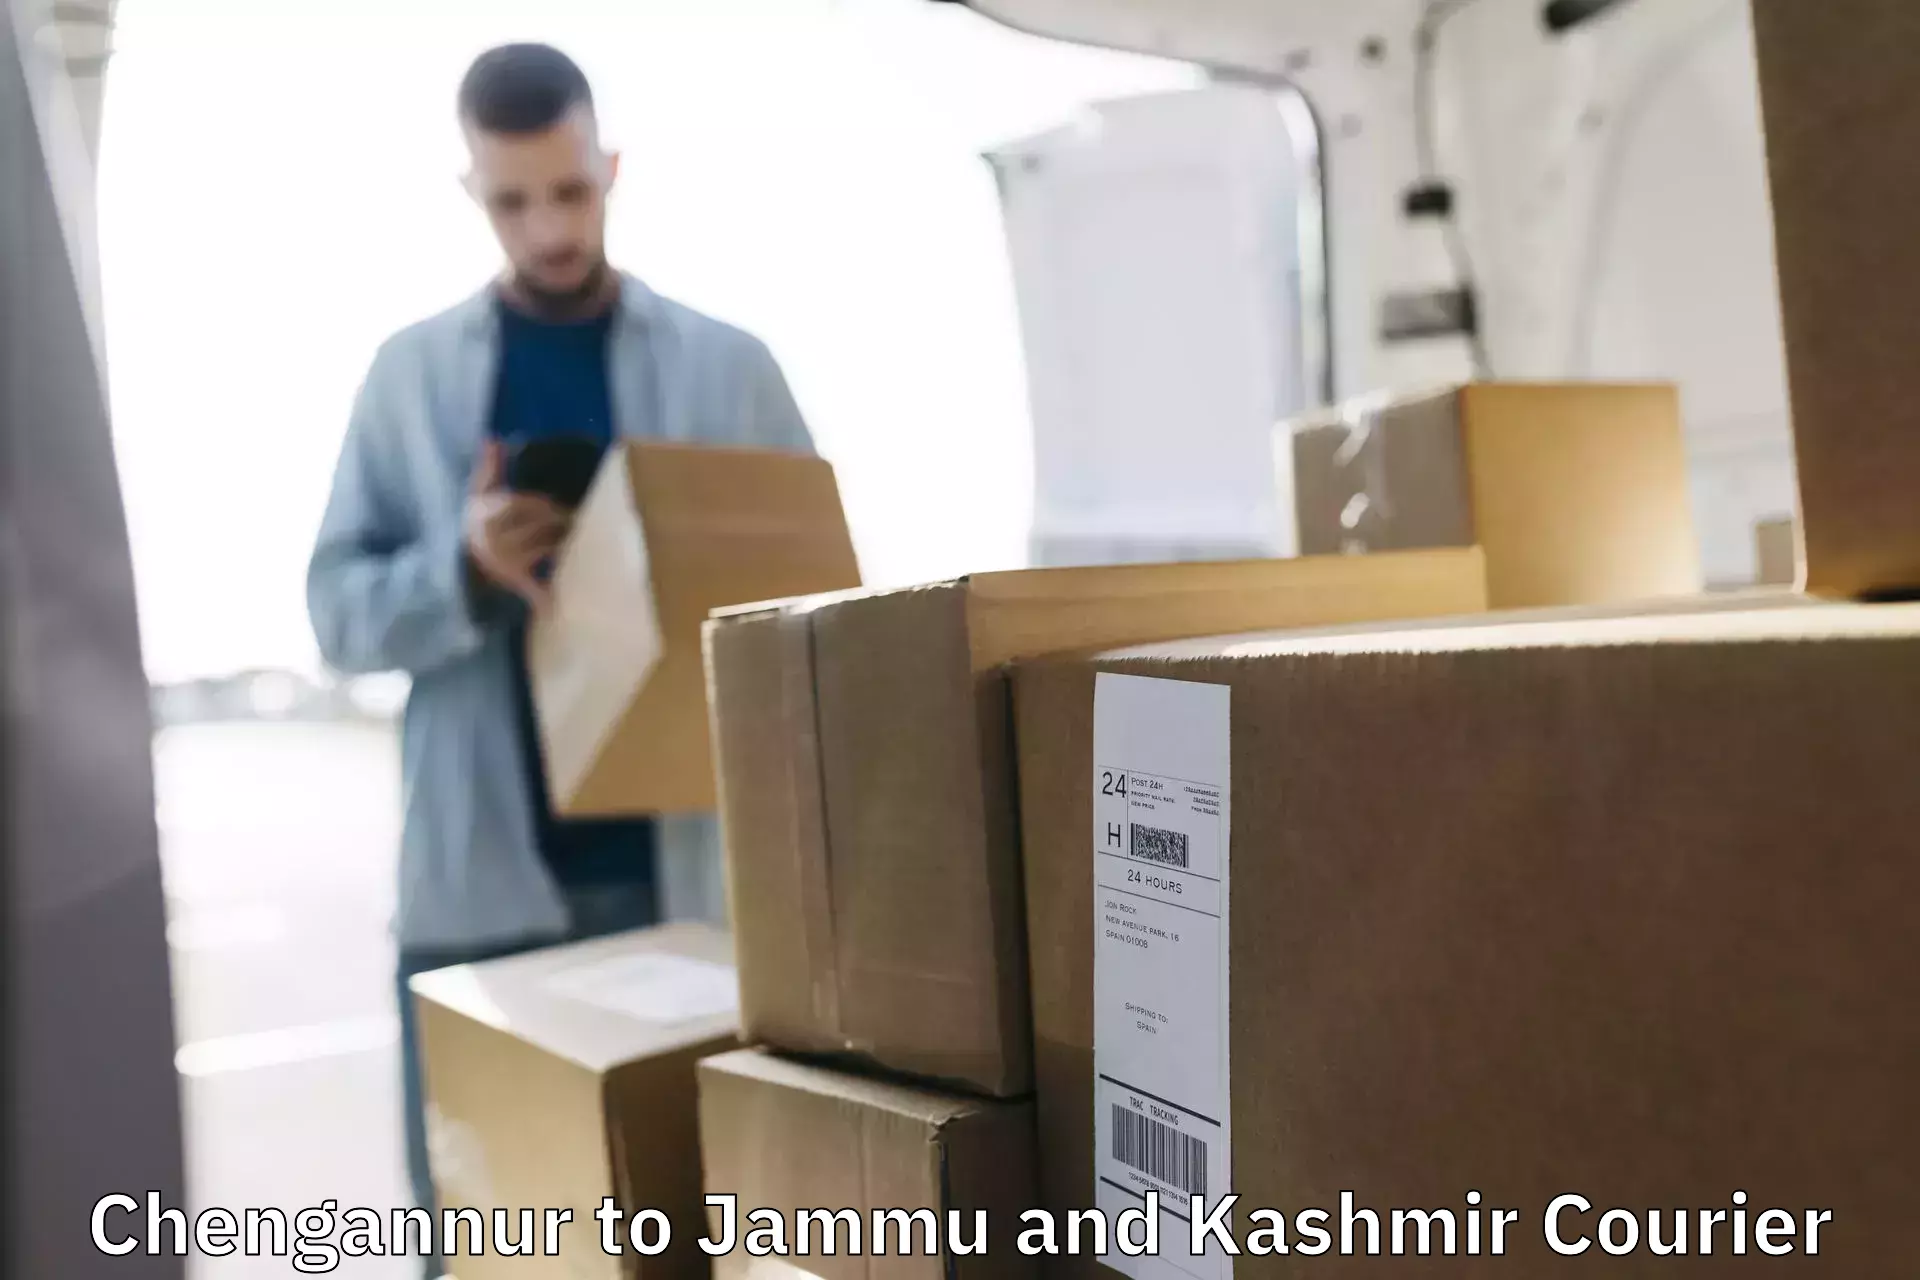 Ocean freight courier Chengannur to Jammu and Kashmir